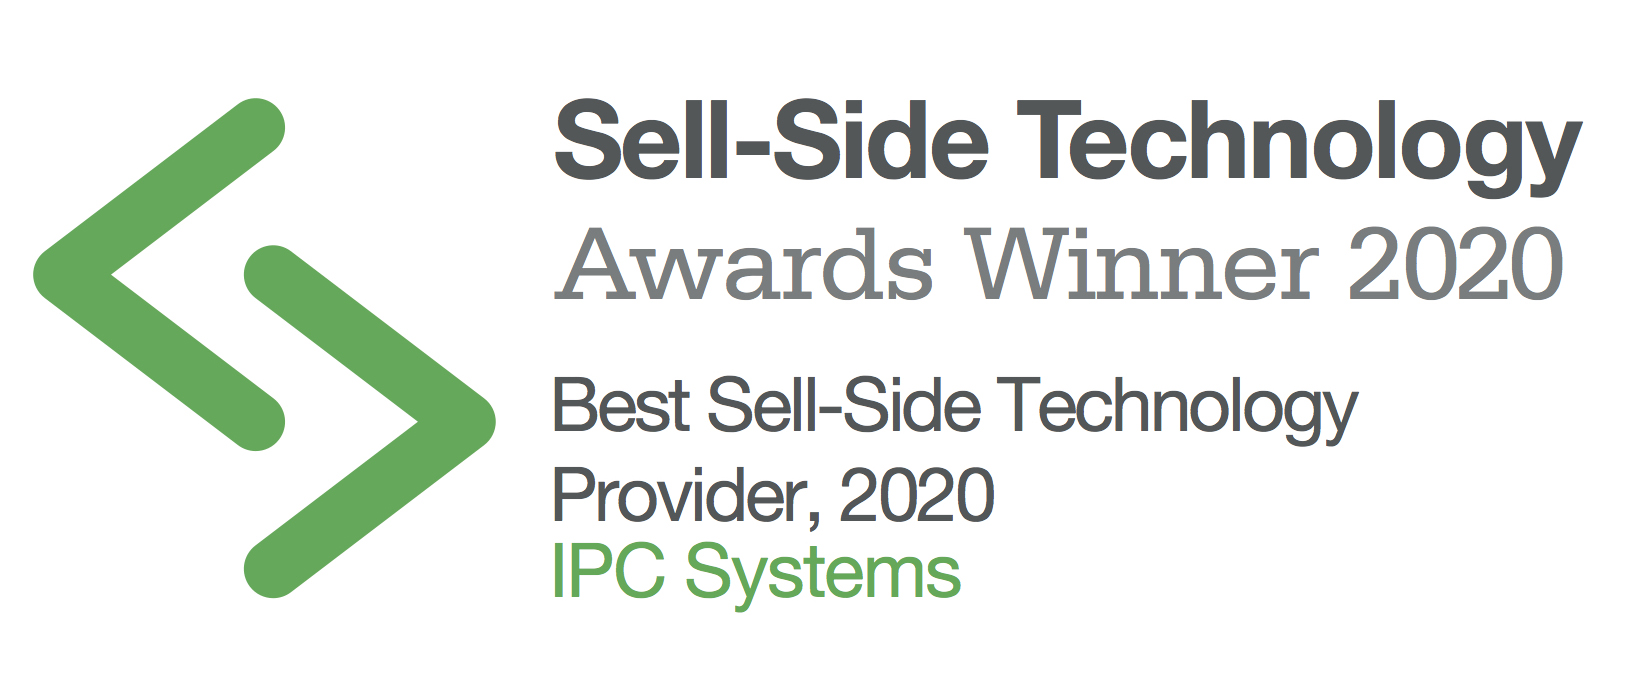 “Best Sell-Side Technology Provider” – Waters Sell-Side Technology Awards 2020